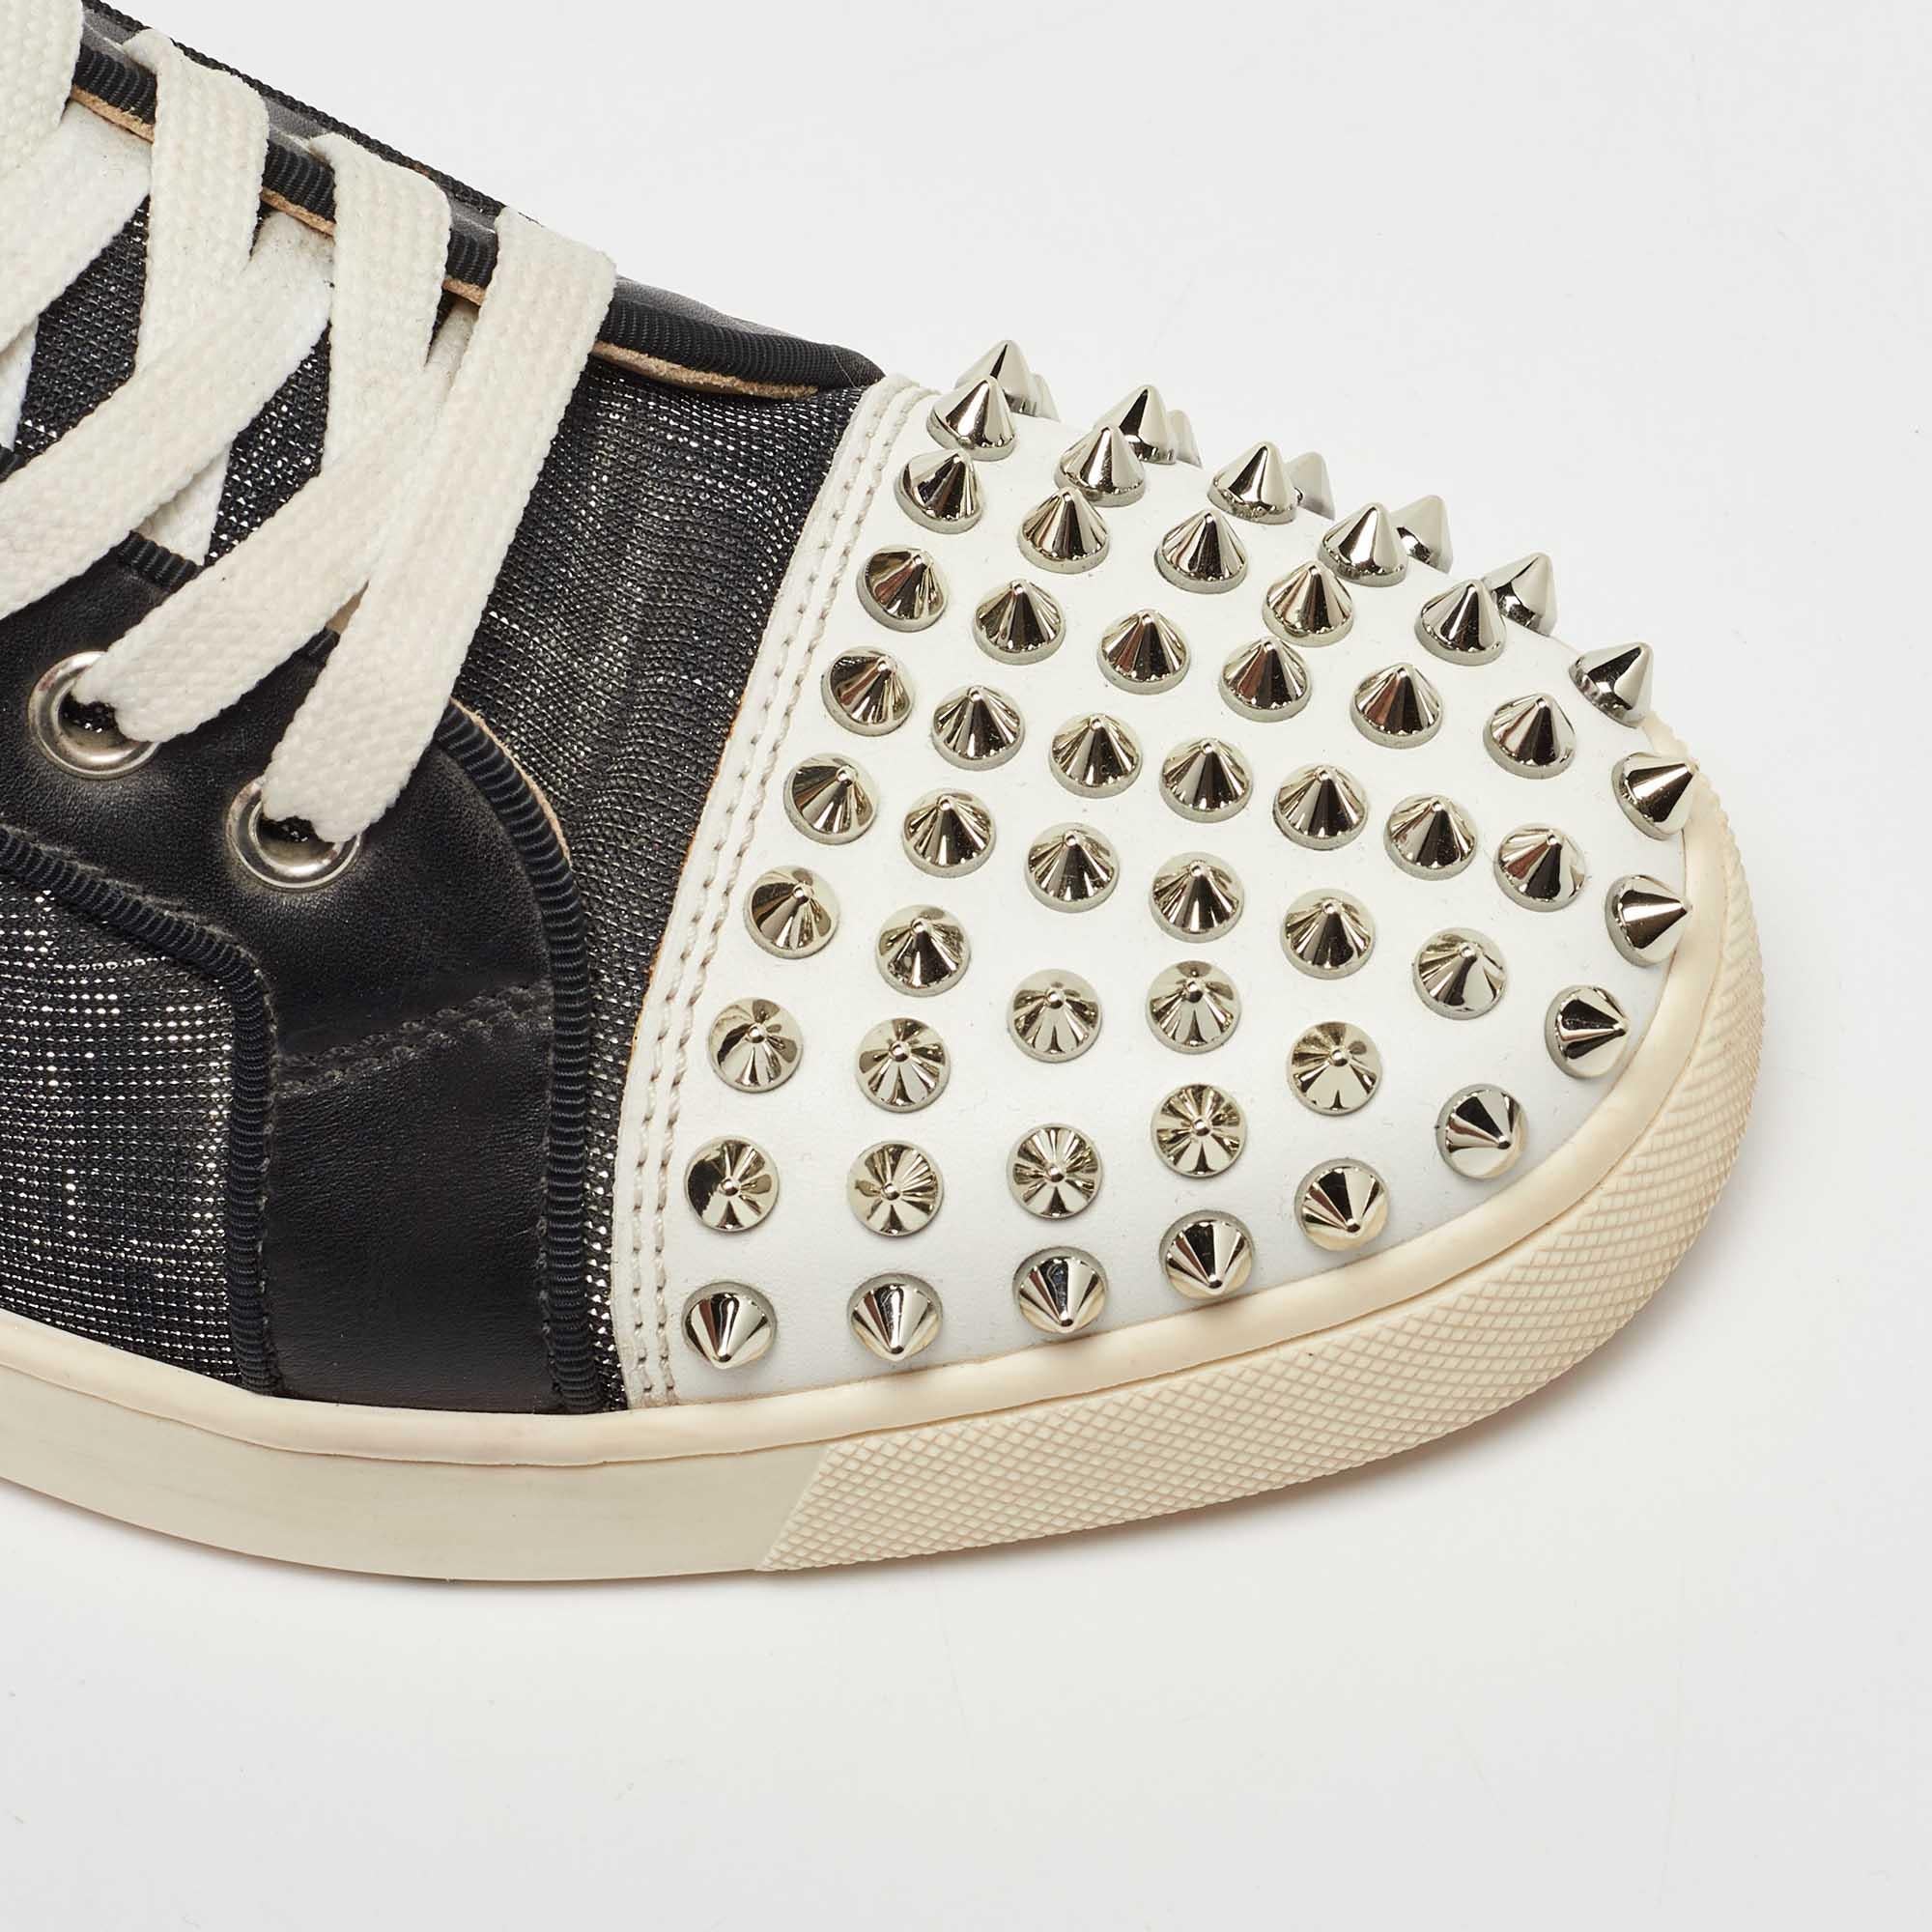 Christian Louboutin Leather and Mesh Louis Spikes Orlato Sneakers Size 37.5 For Sale 2